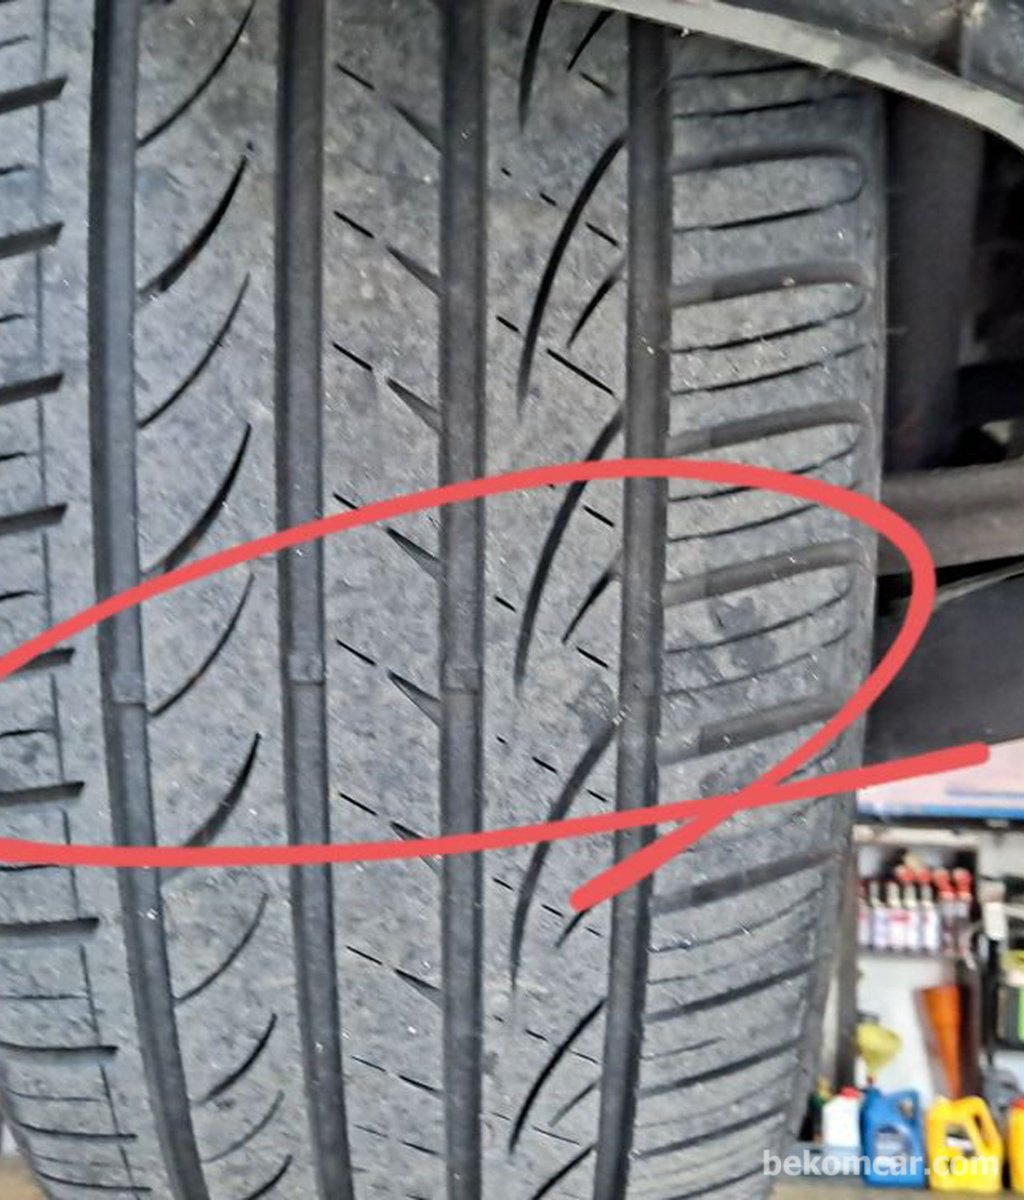 Used car inspection of tire tread wear and look|bekomcar.com